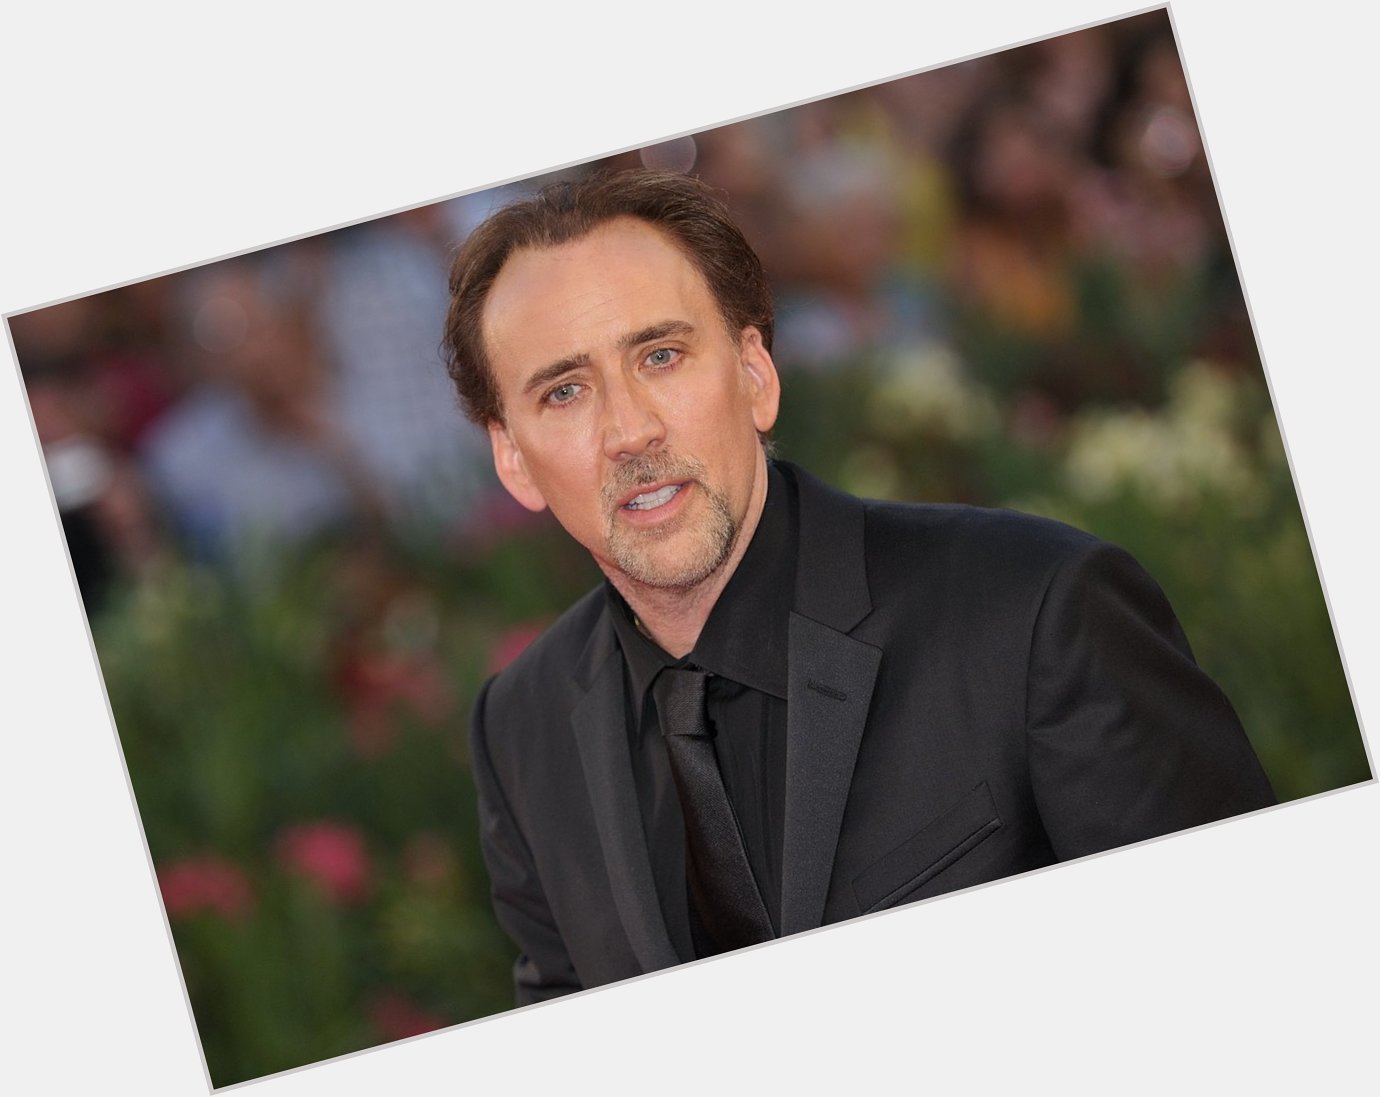 Happy Birthday to Nicolas Cage who turns 57 today! 